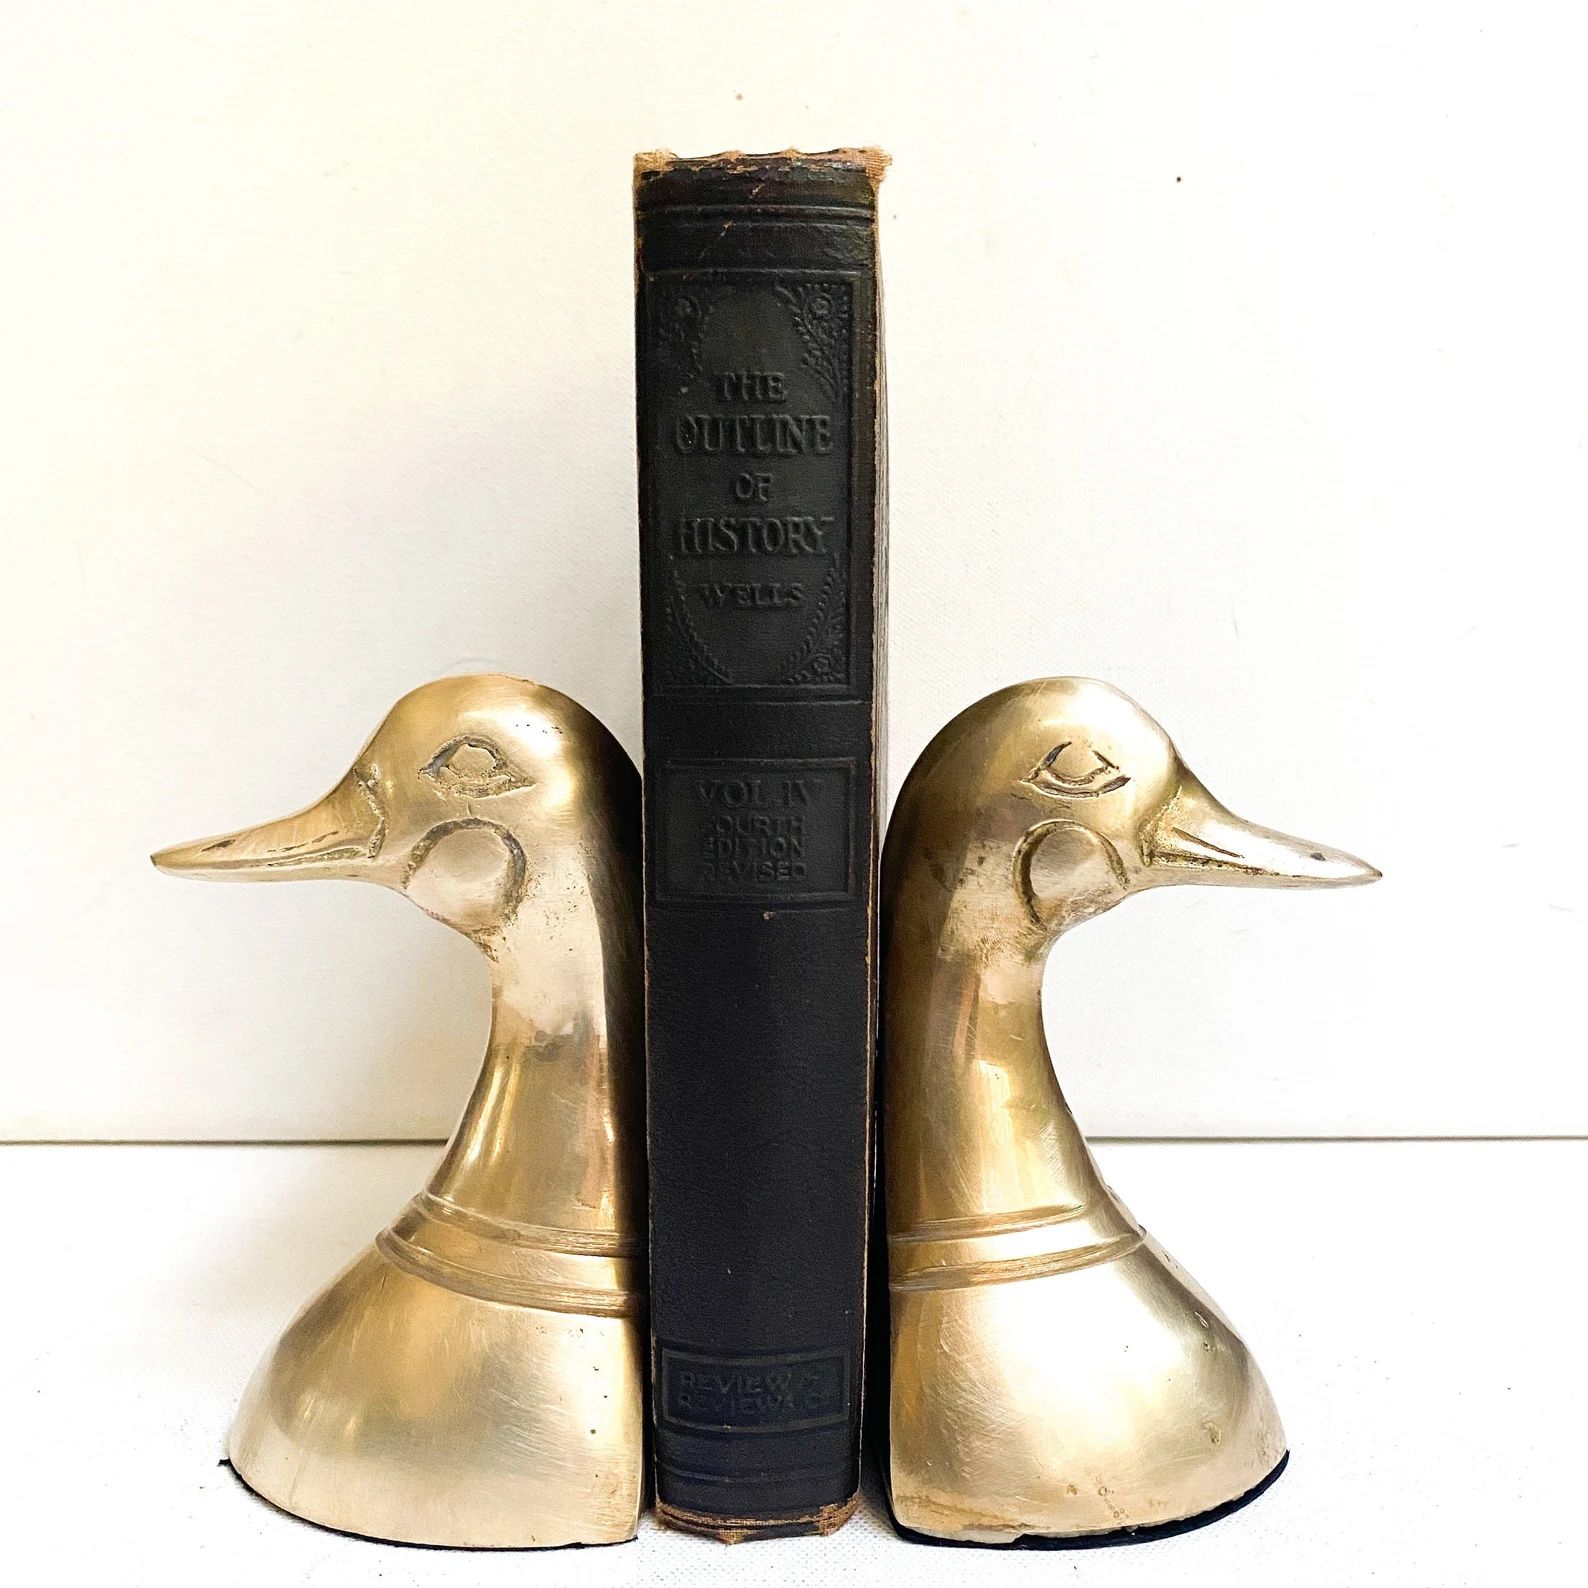 Gift for book lover: Two golden duck book ends on either side of a dark brown vintage book.